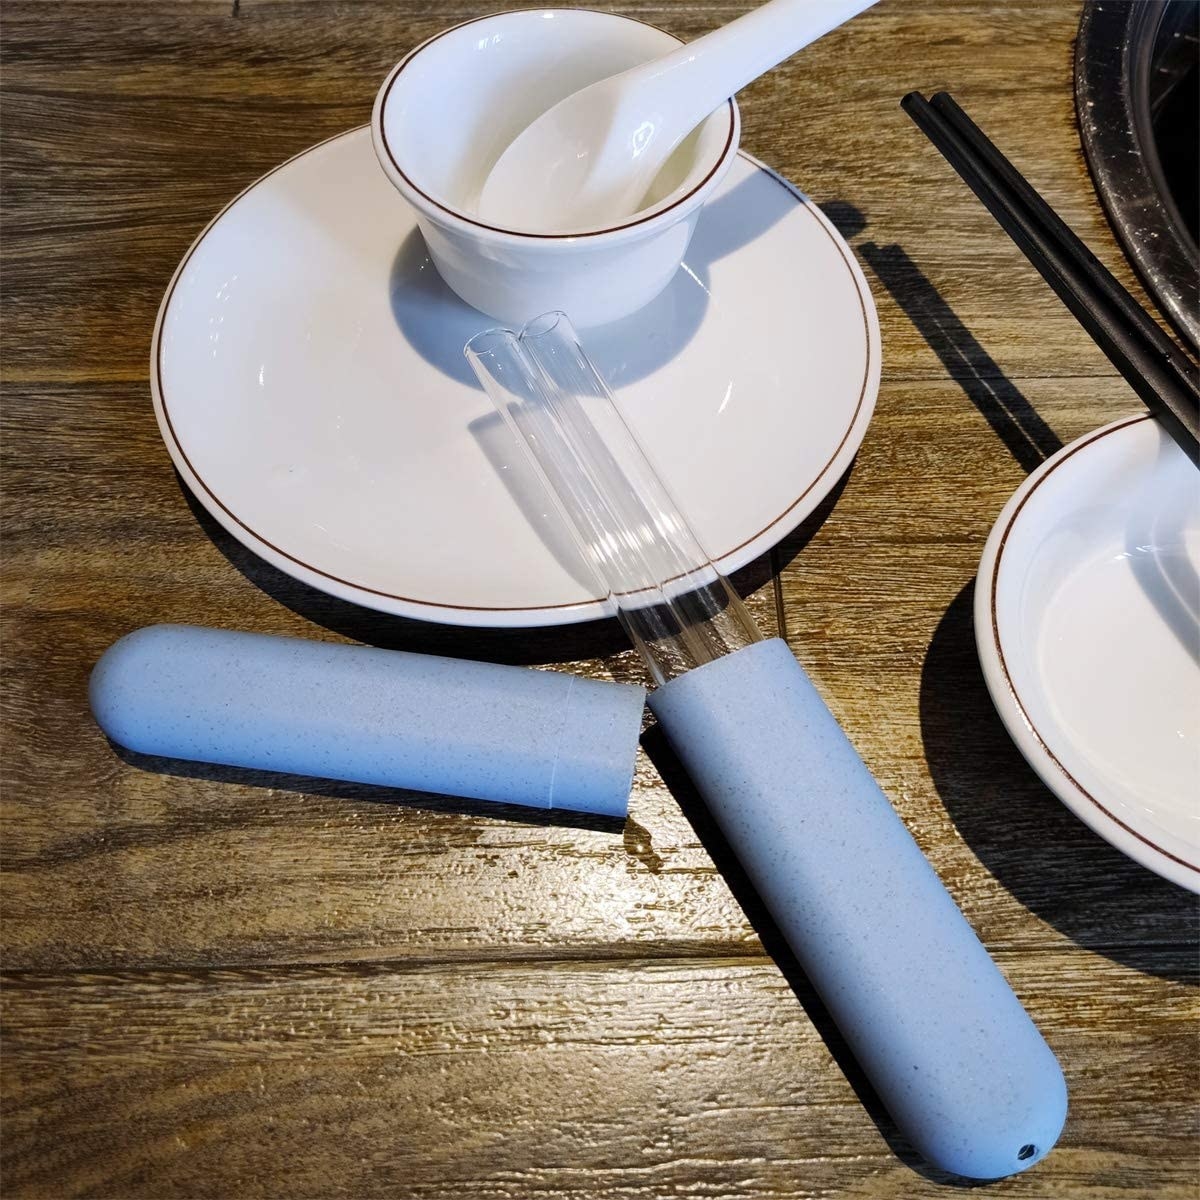 The straws in their case leaning on a tea saucer